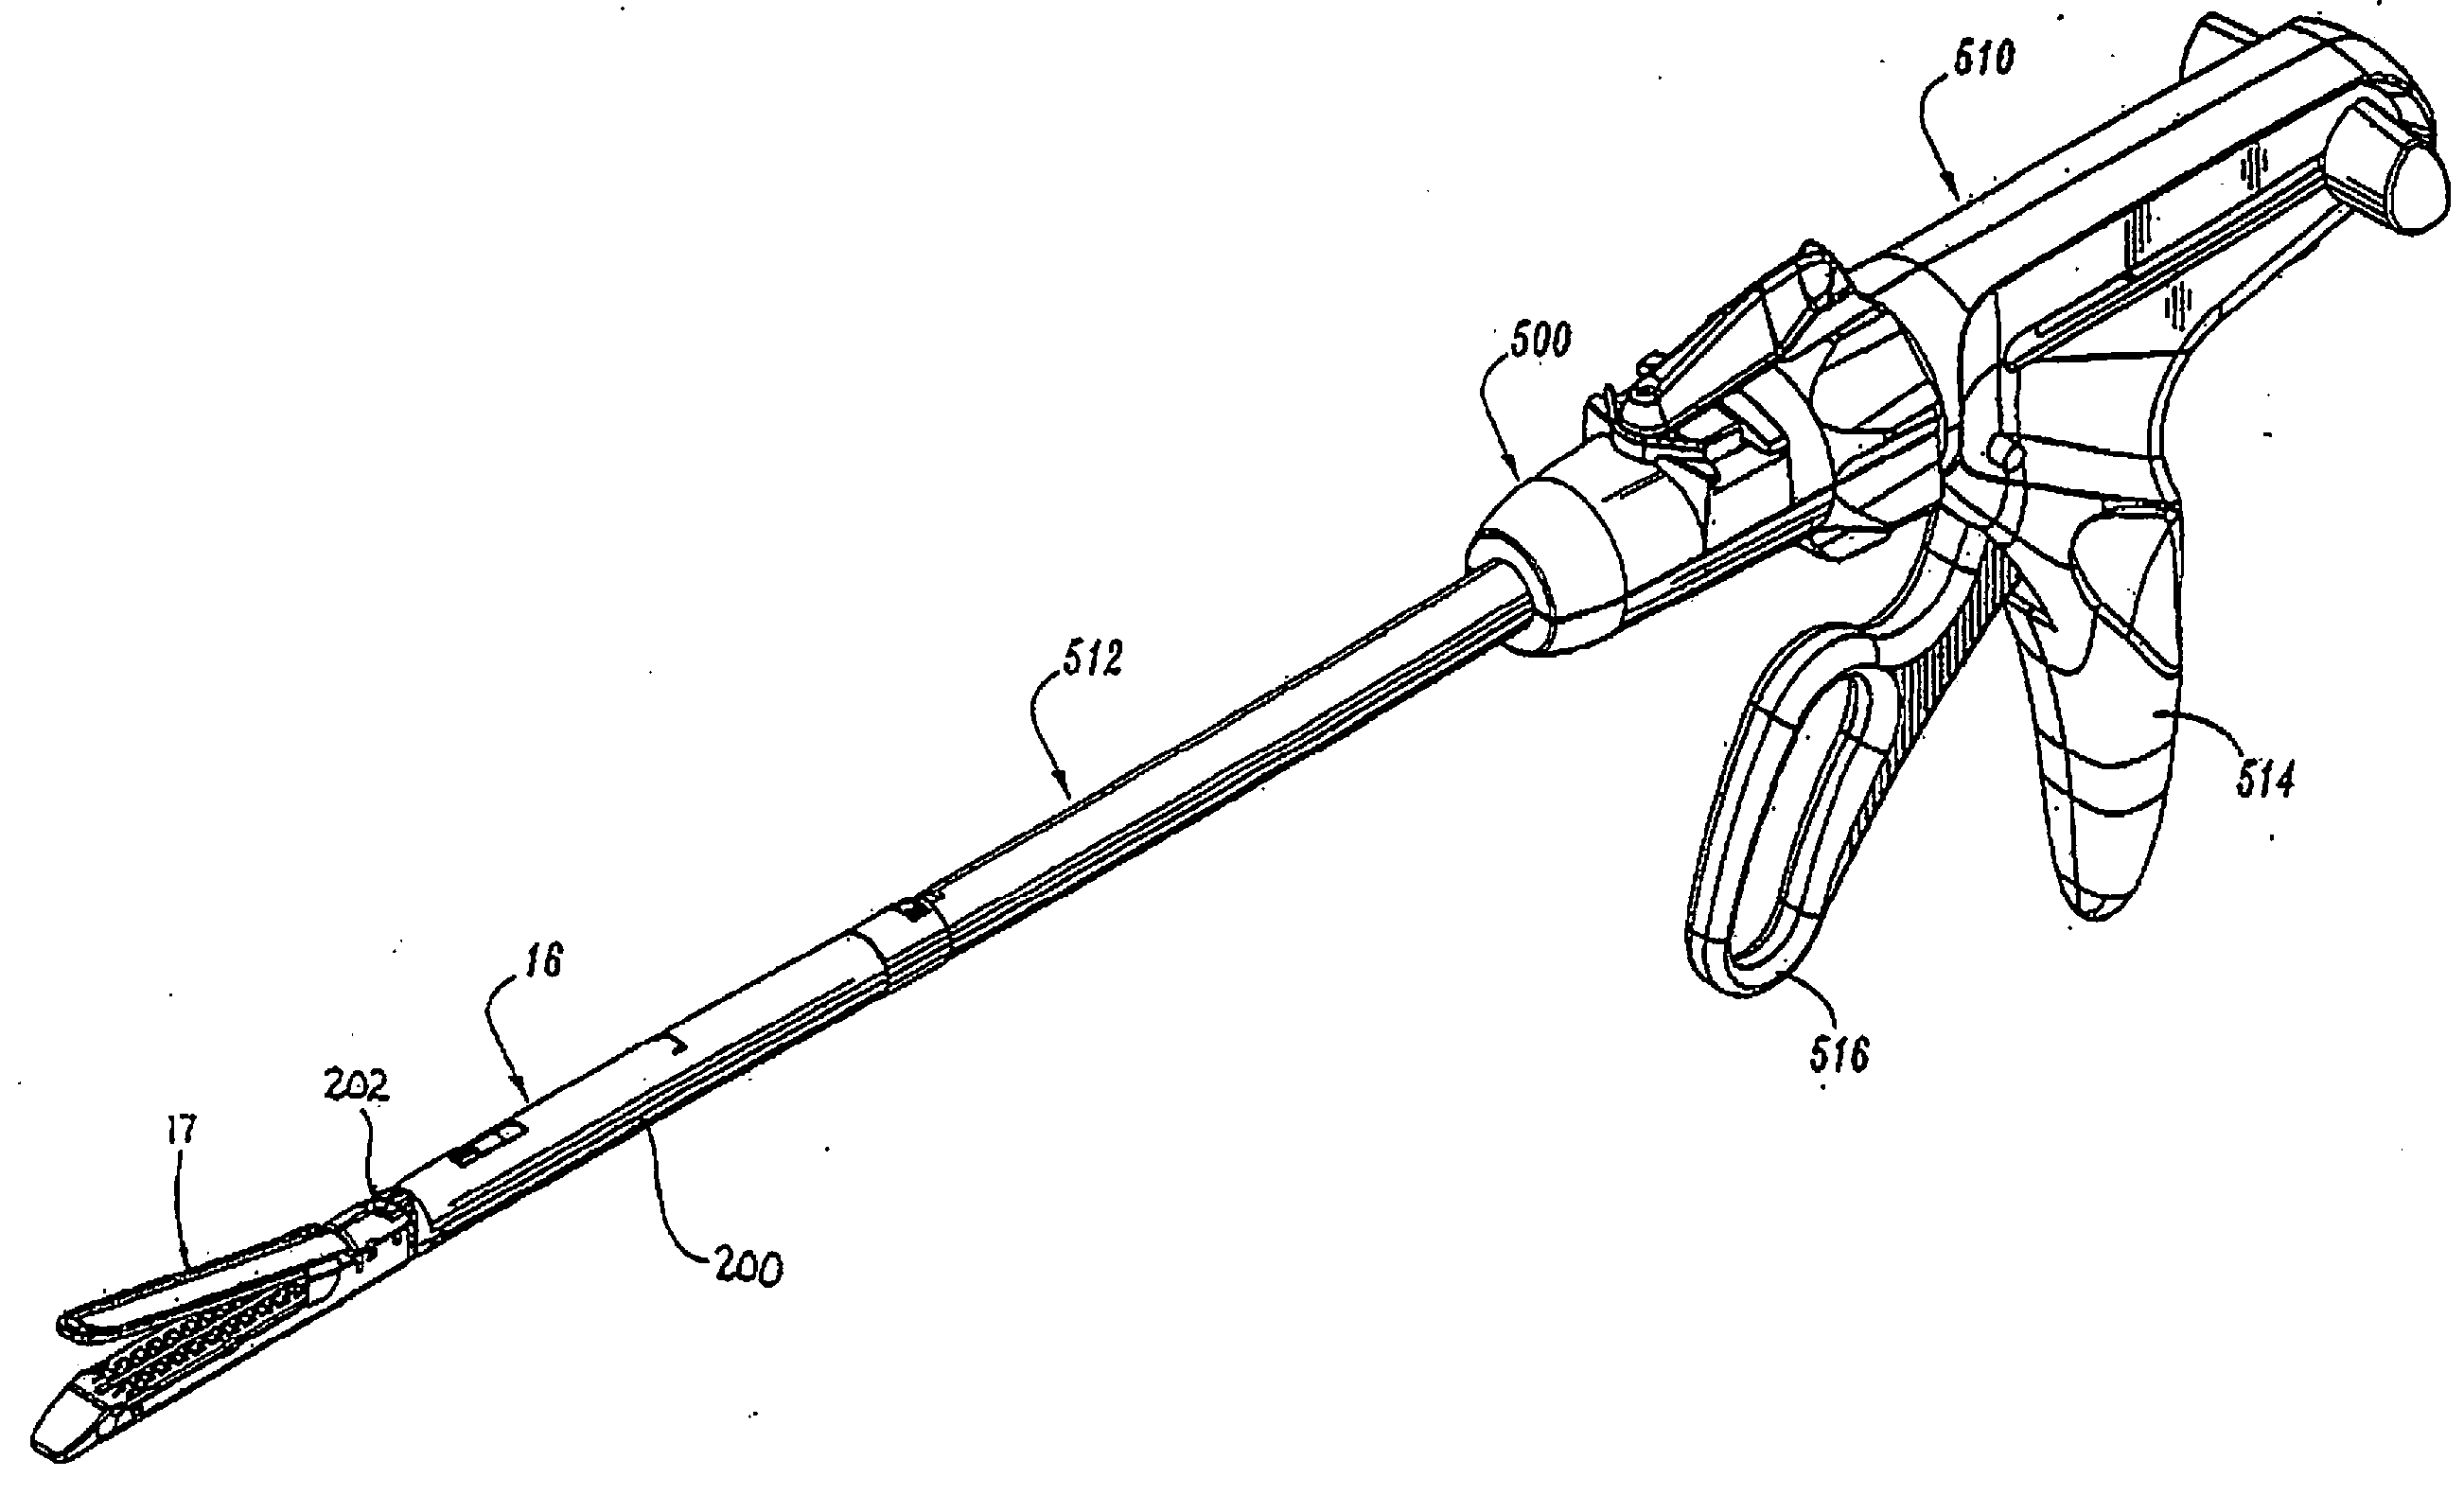 Surgical Instrument Having a Plastic Surface